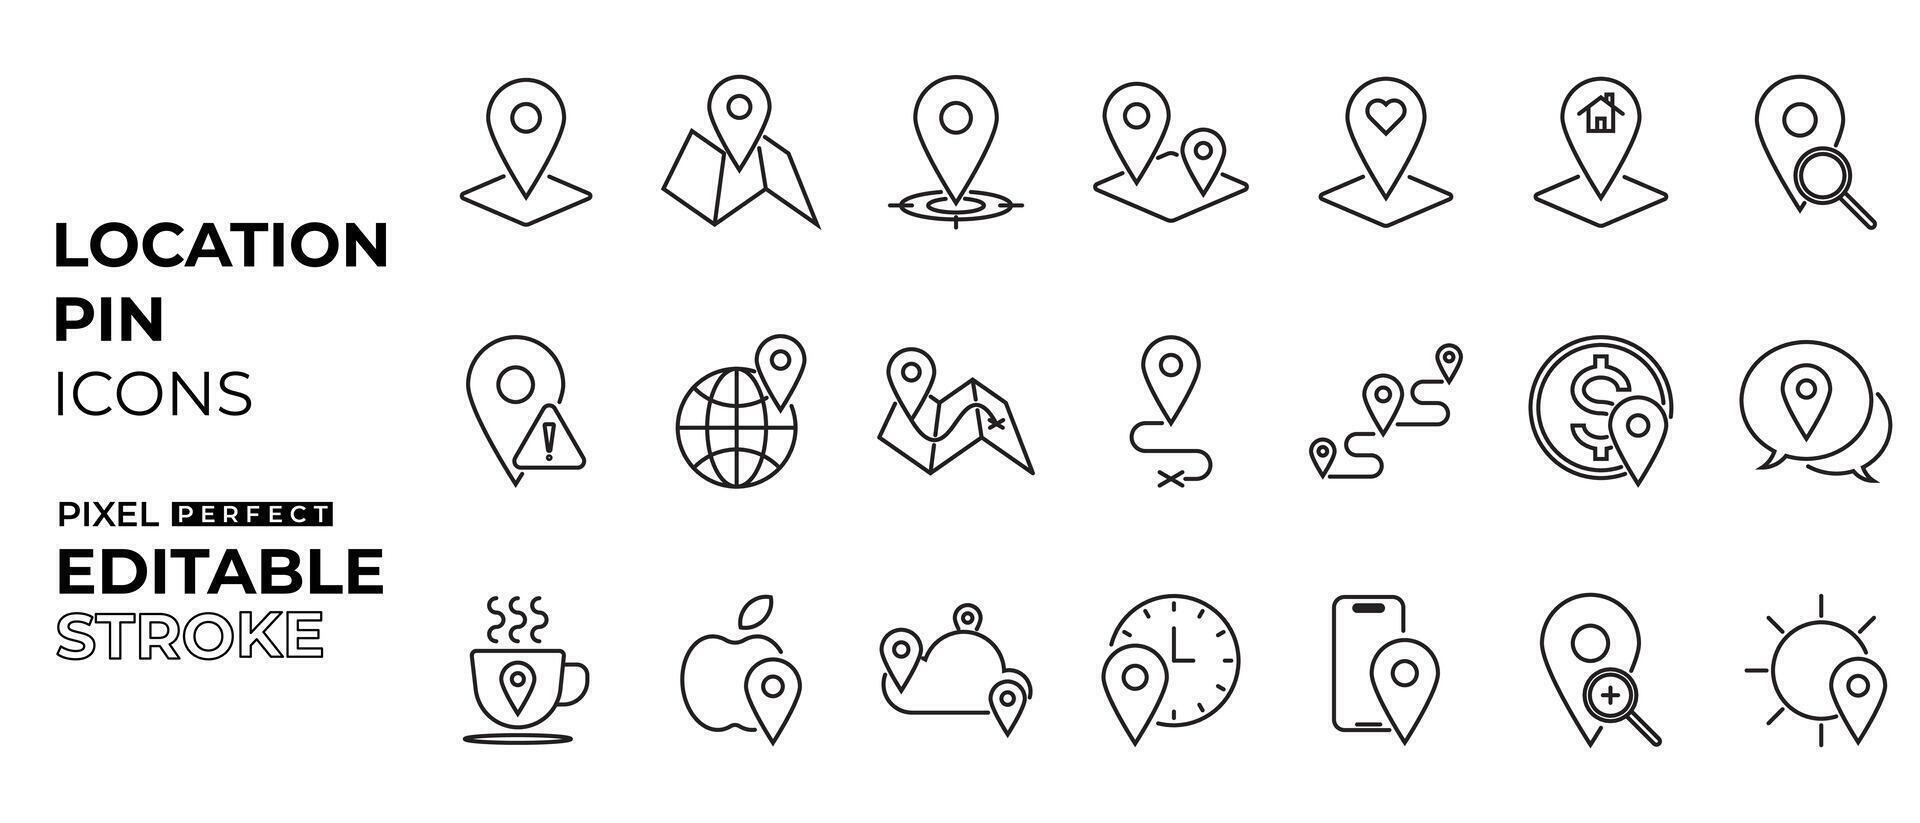 location pin icons collection with map, weather, location, food, search travel and path with editable stroke vector